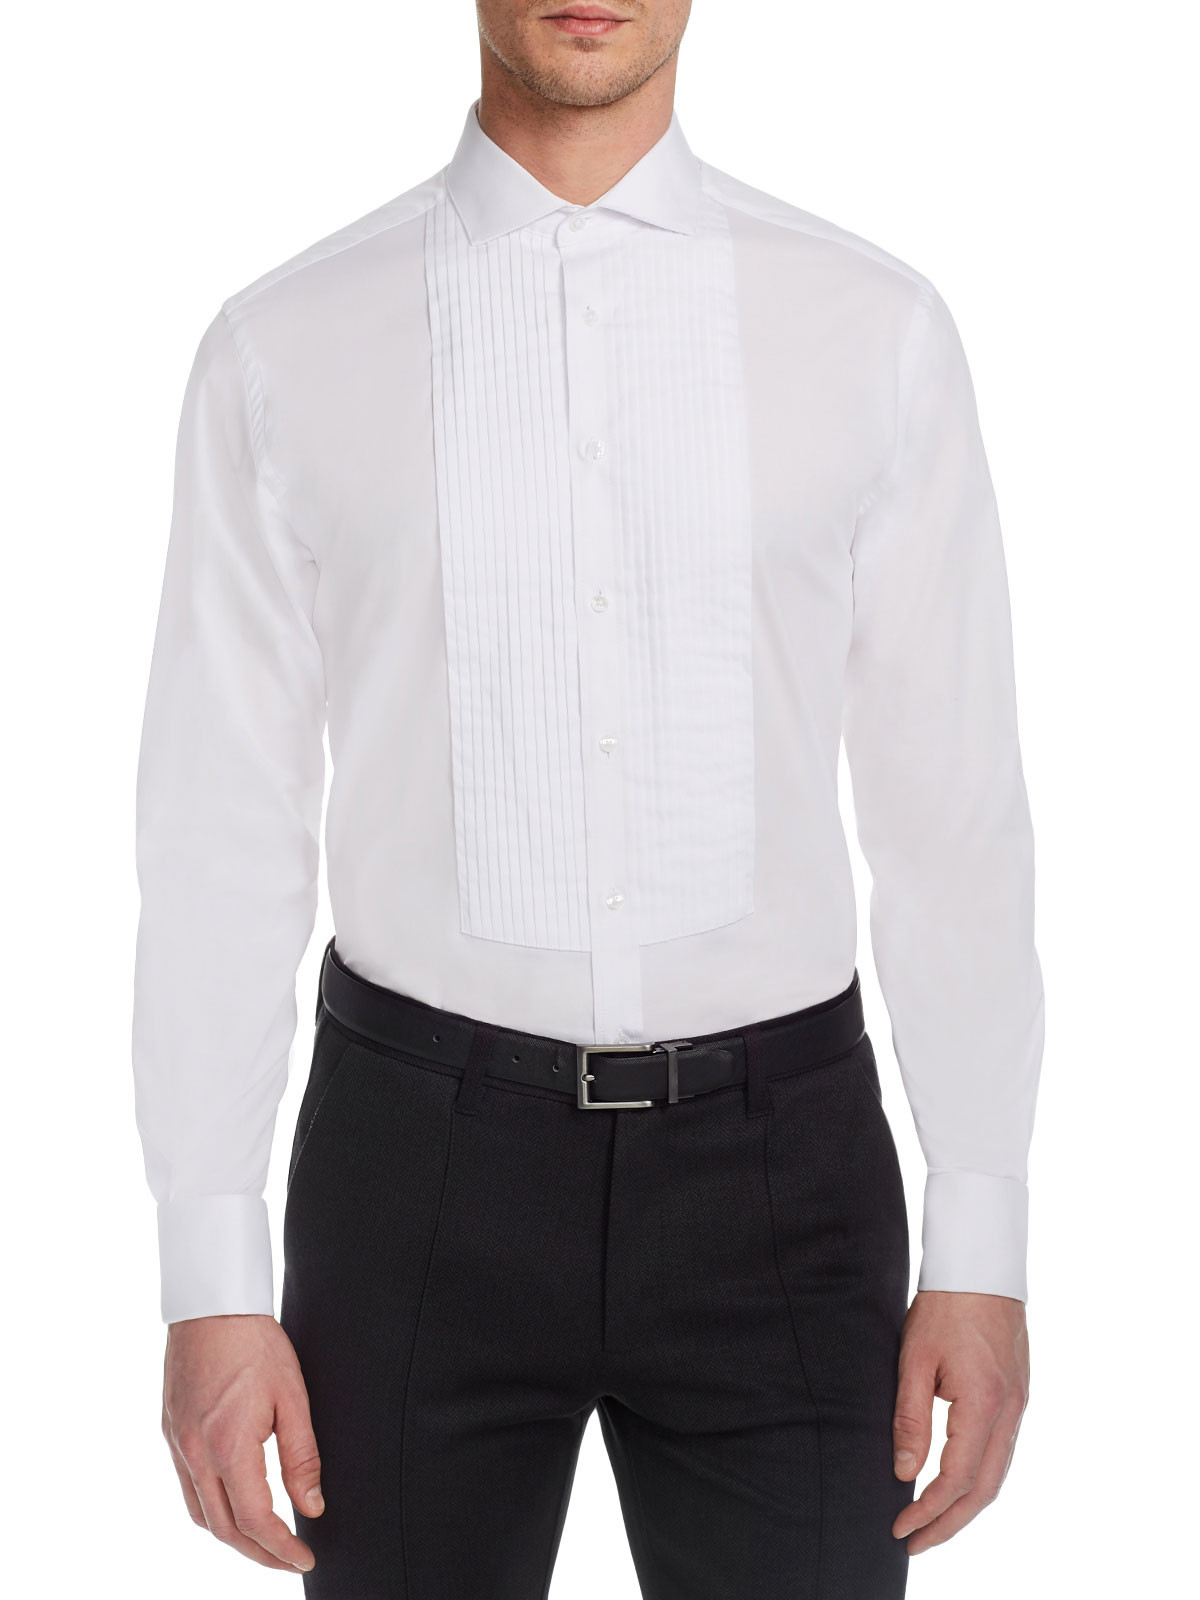 CLASSIC FIT PLEATED TUXEDO SHIRT